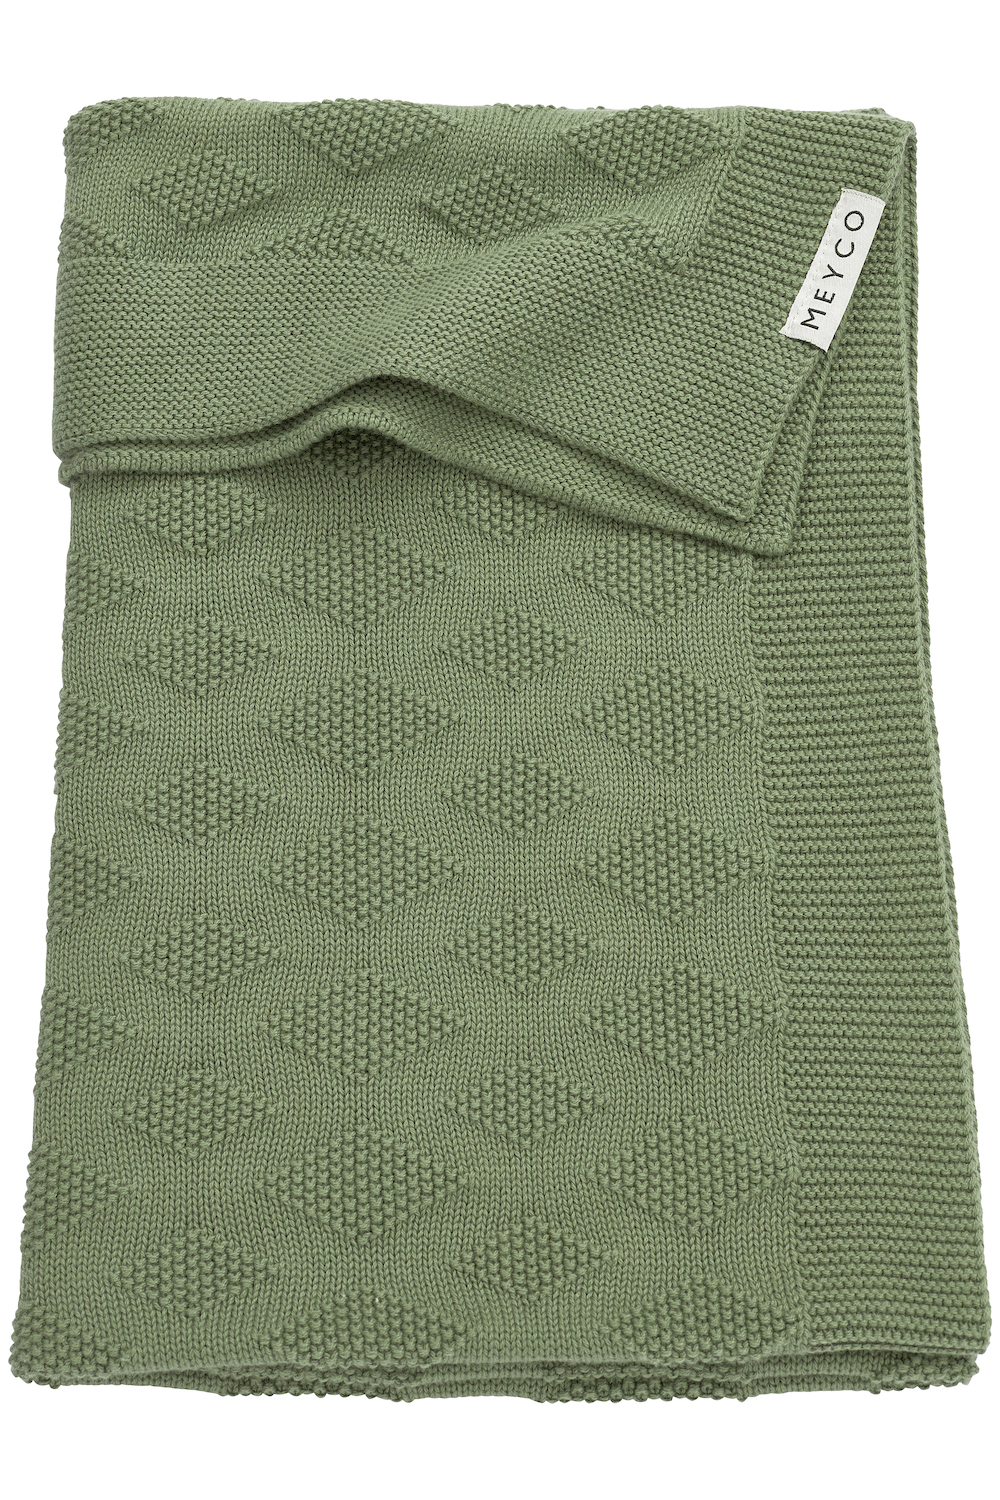 Organic Cot Bed Blanket Diamond - Forest Green - 100x150cm